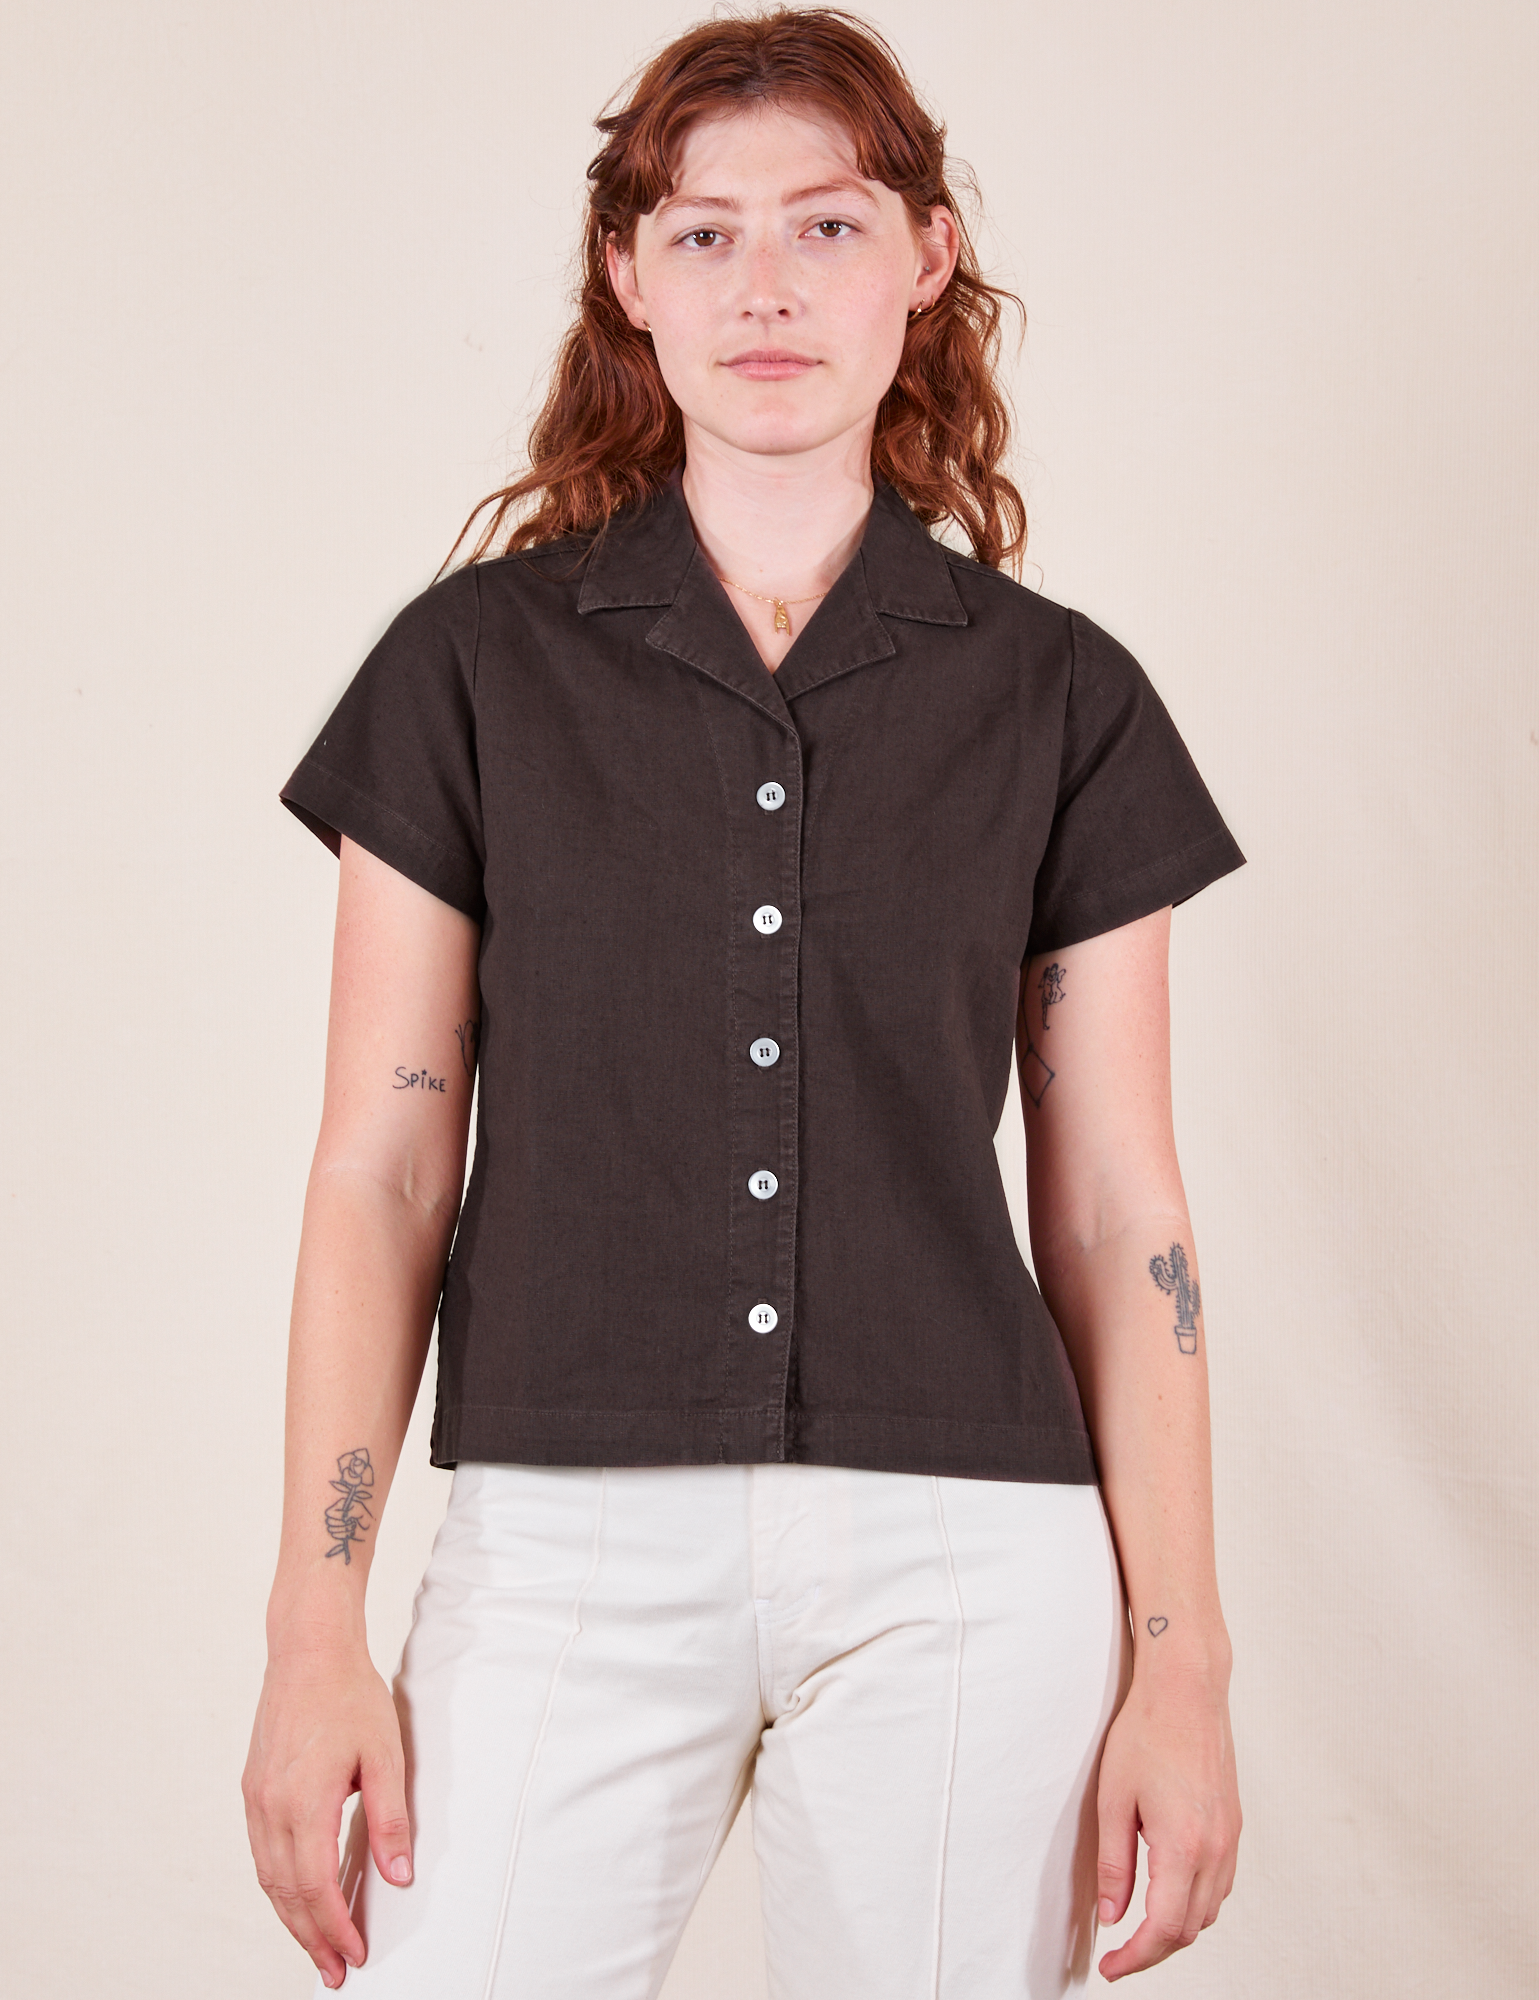 Alex is wearing Pantry Button-Up in Espresso Brown